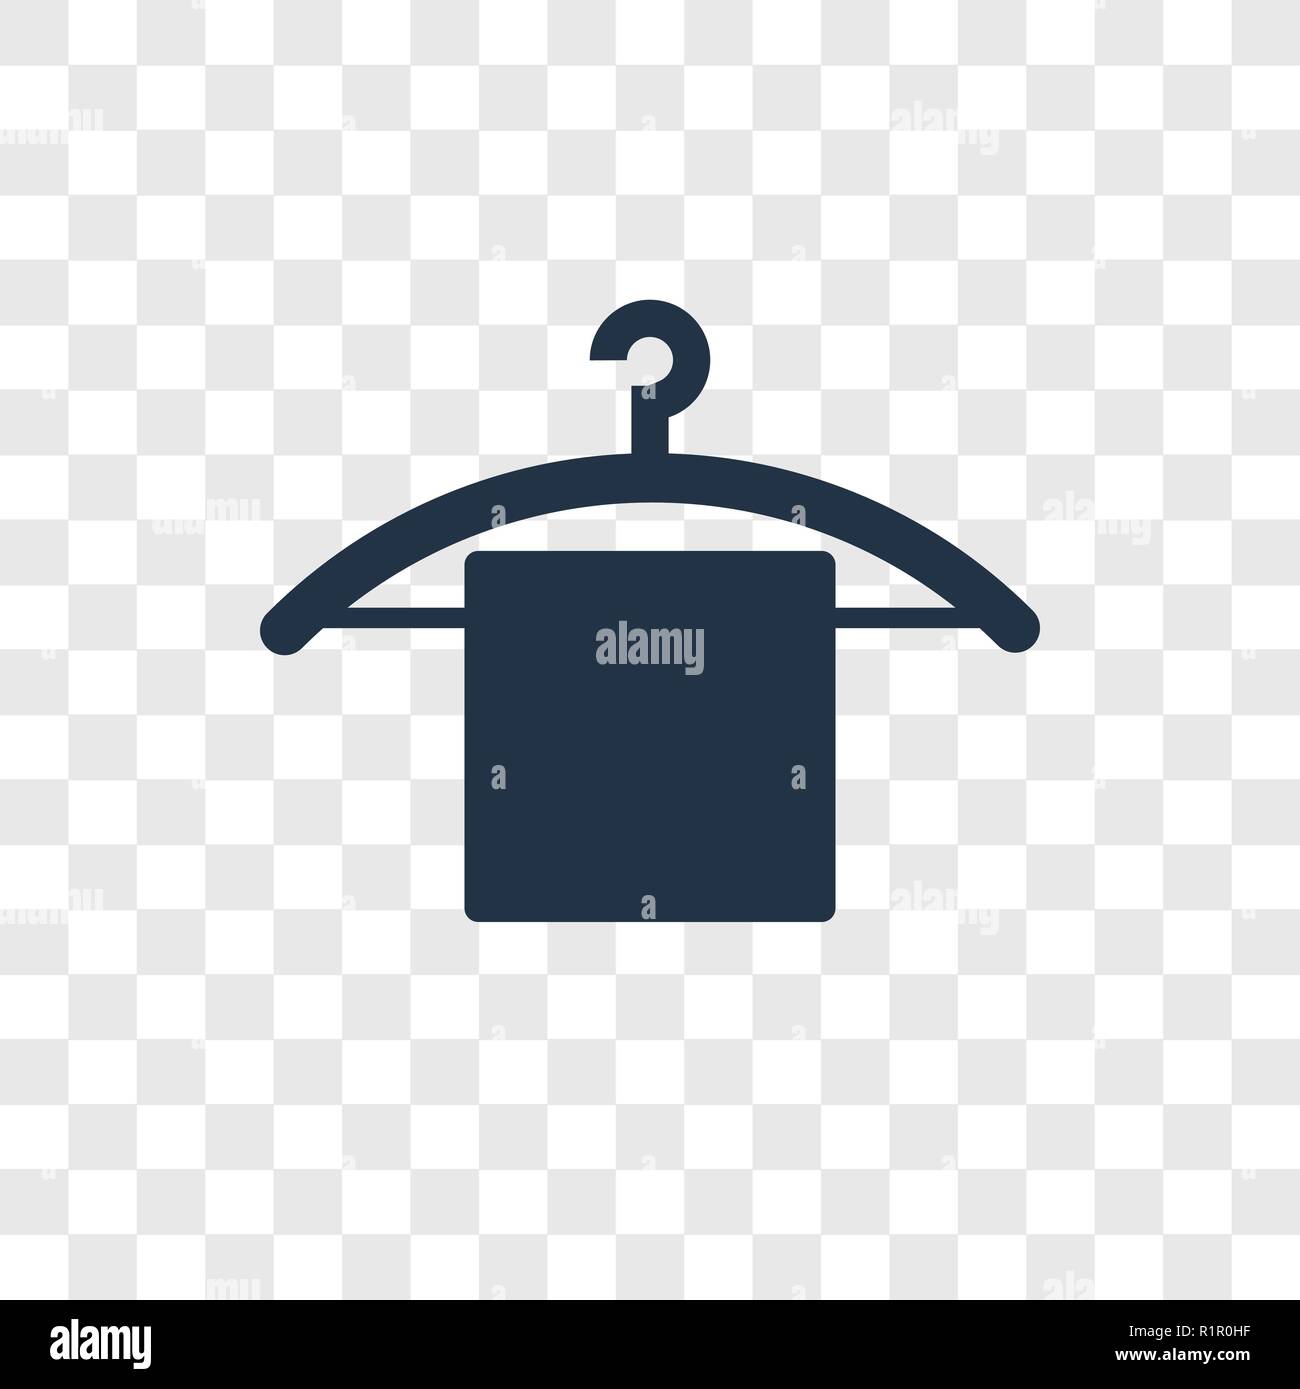 https://c8.alamy.com/comp/R1R0HF/hanger-vector-icon-isolated-on-transparent-background-hanger-transparency-logo-concept-R1R0HF.jpg